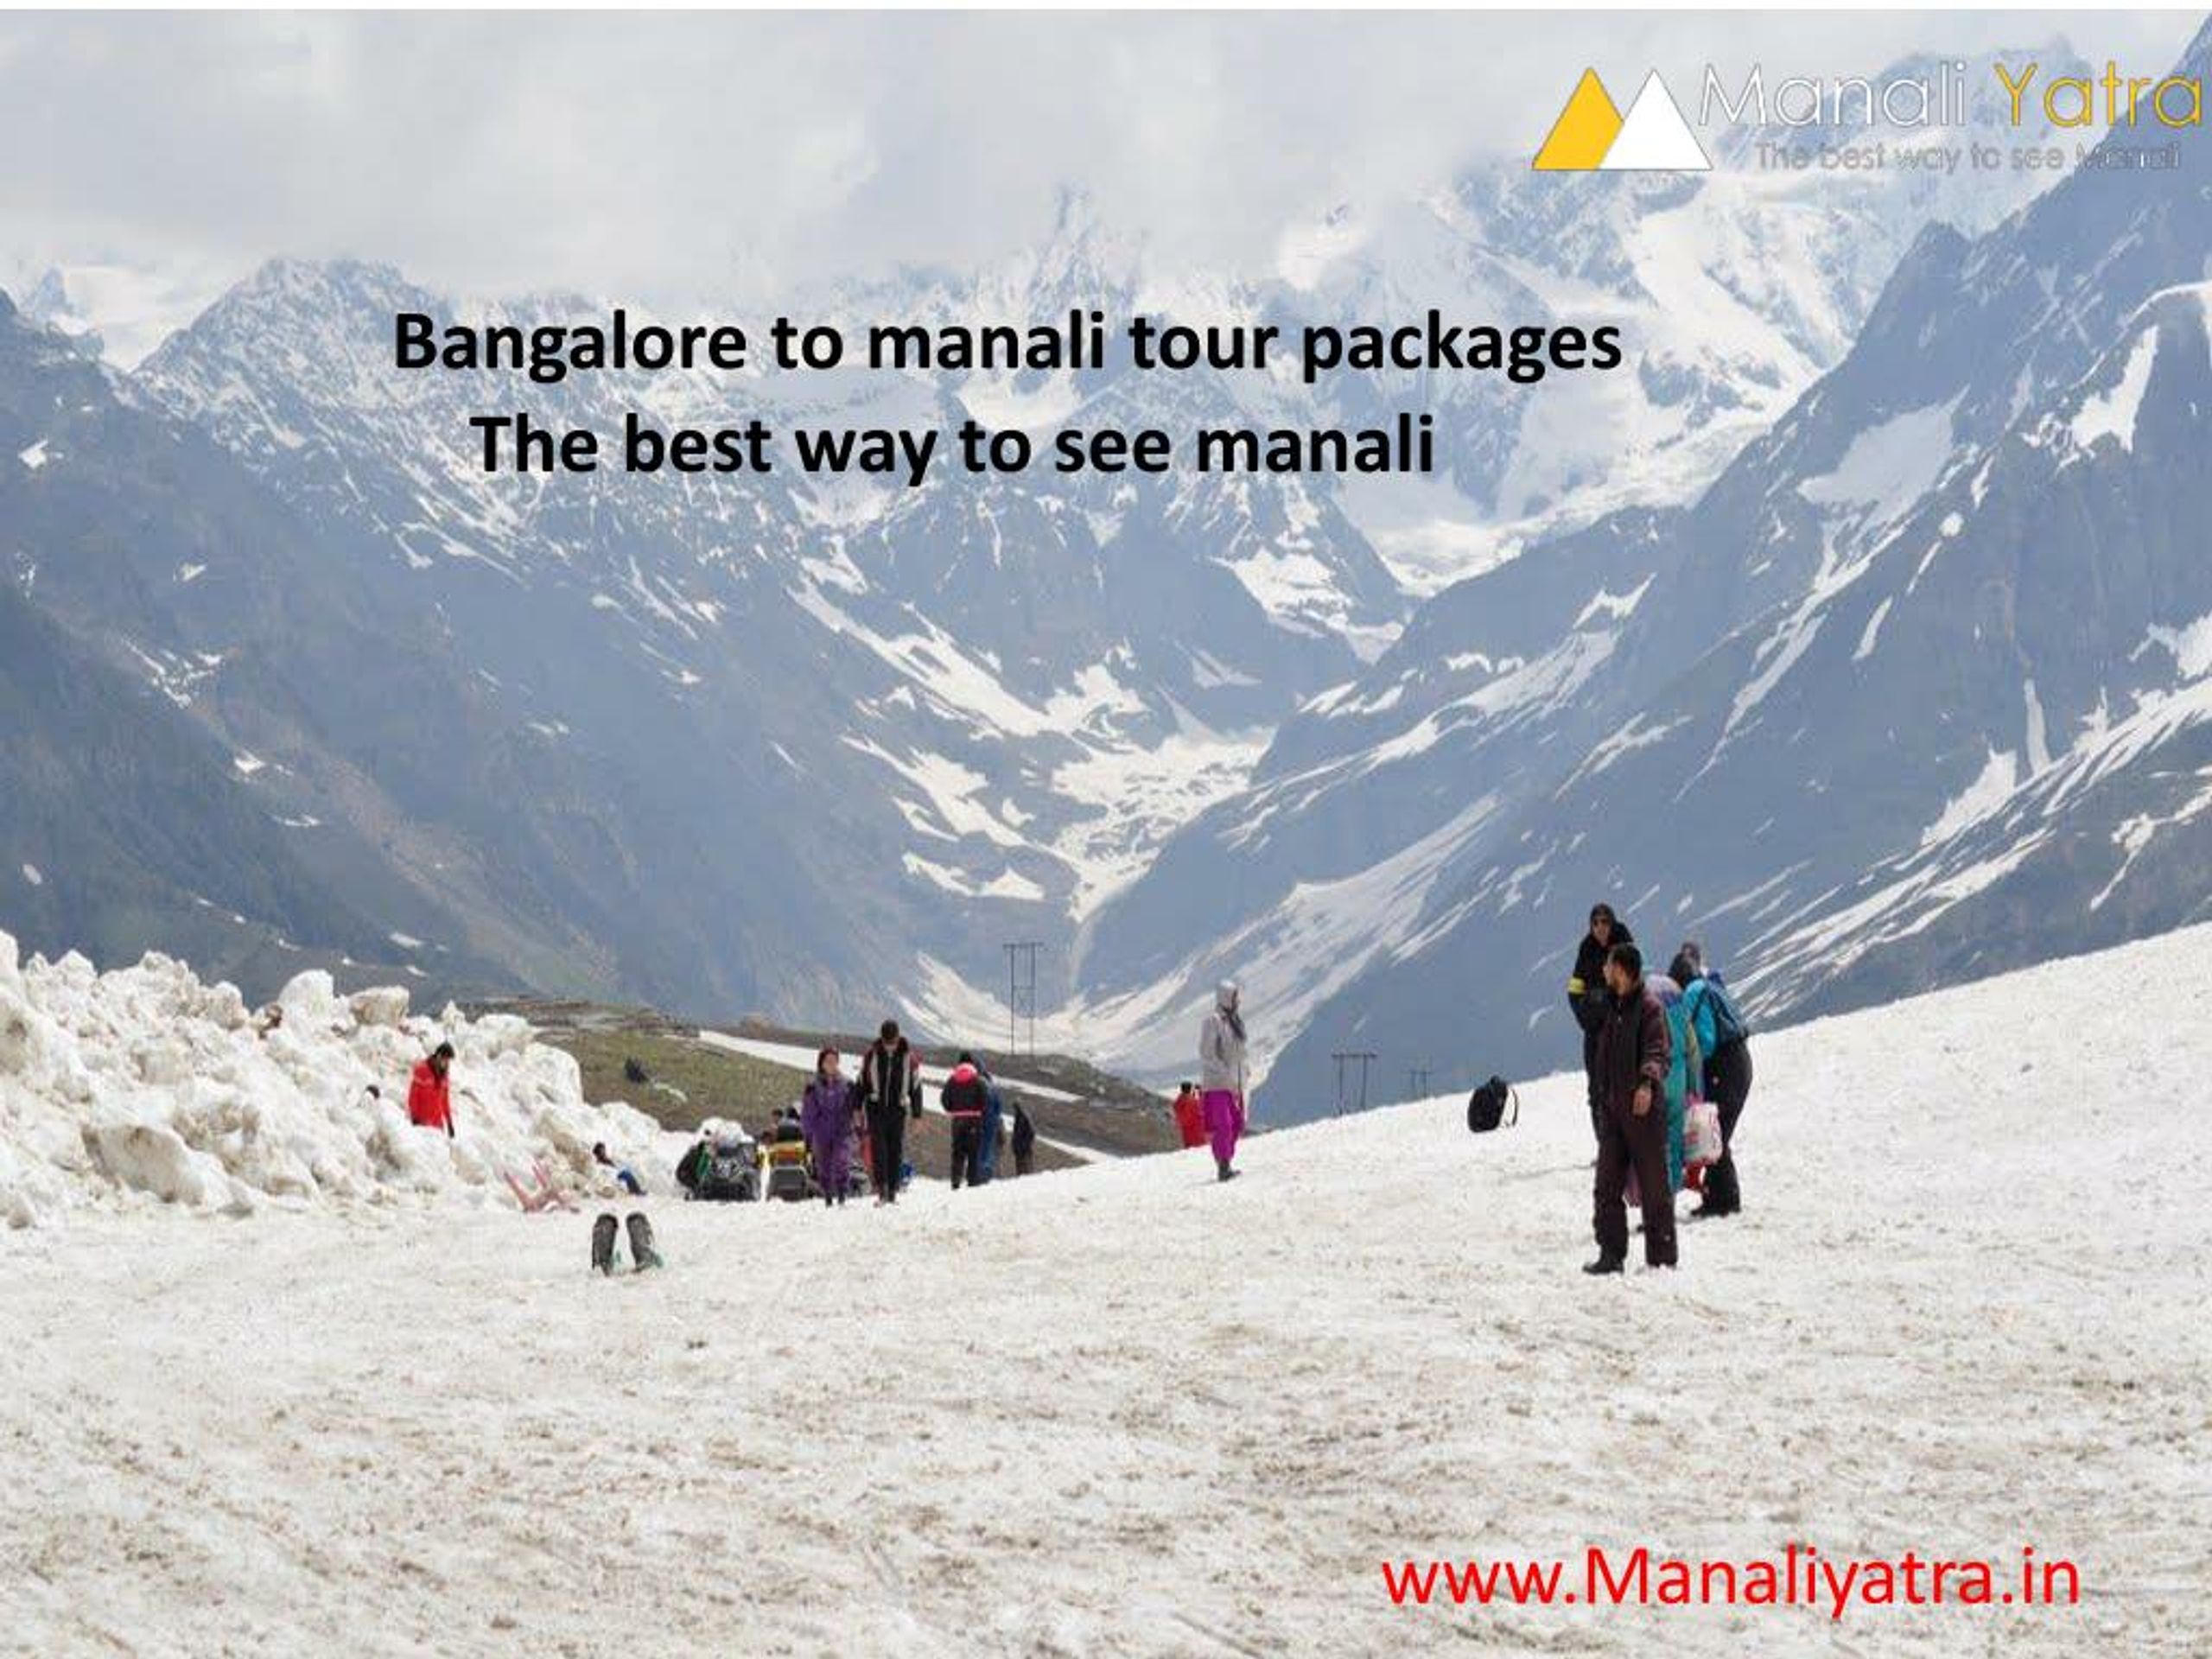 manali trip packages from bangalore